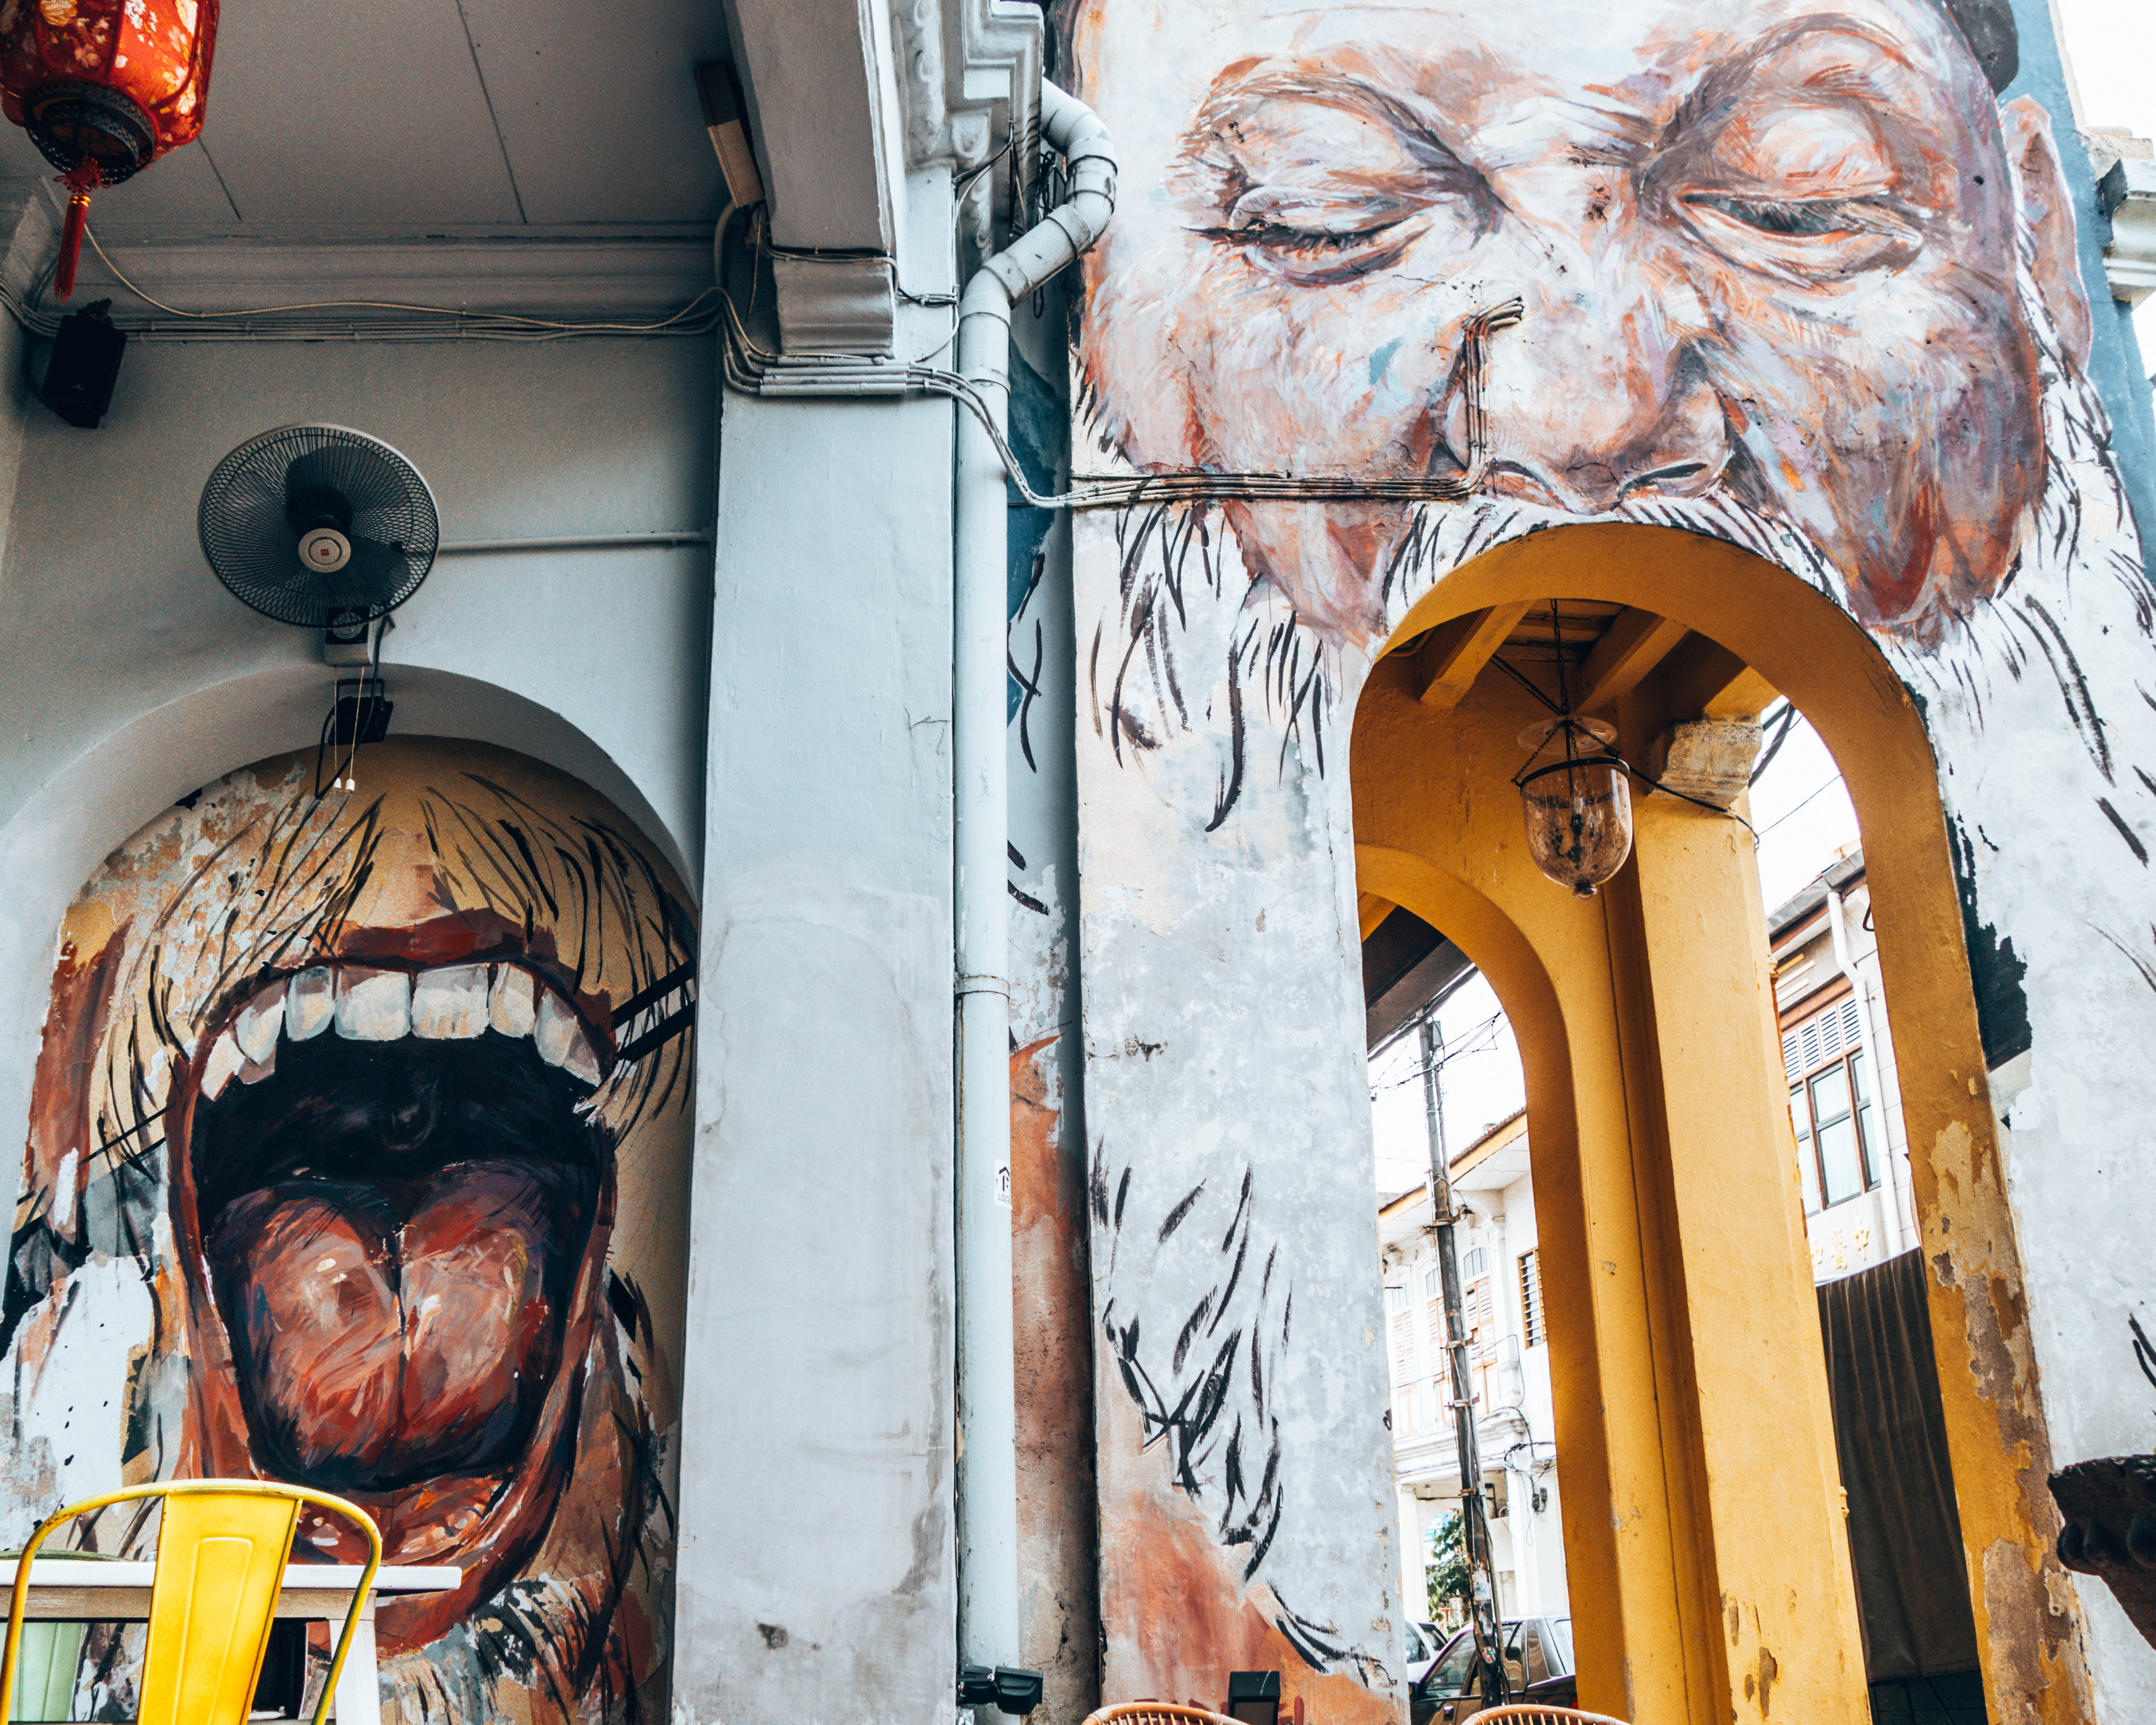 Open your mouth. Street art in Penang, Georgetown, Malaysia